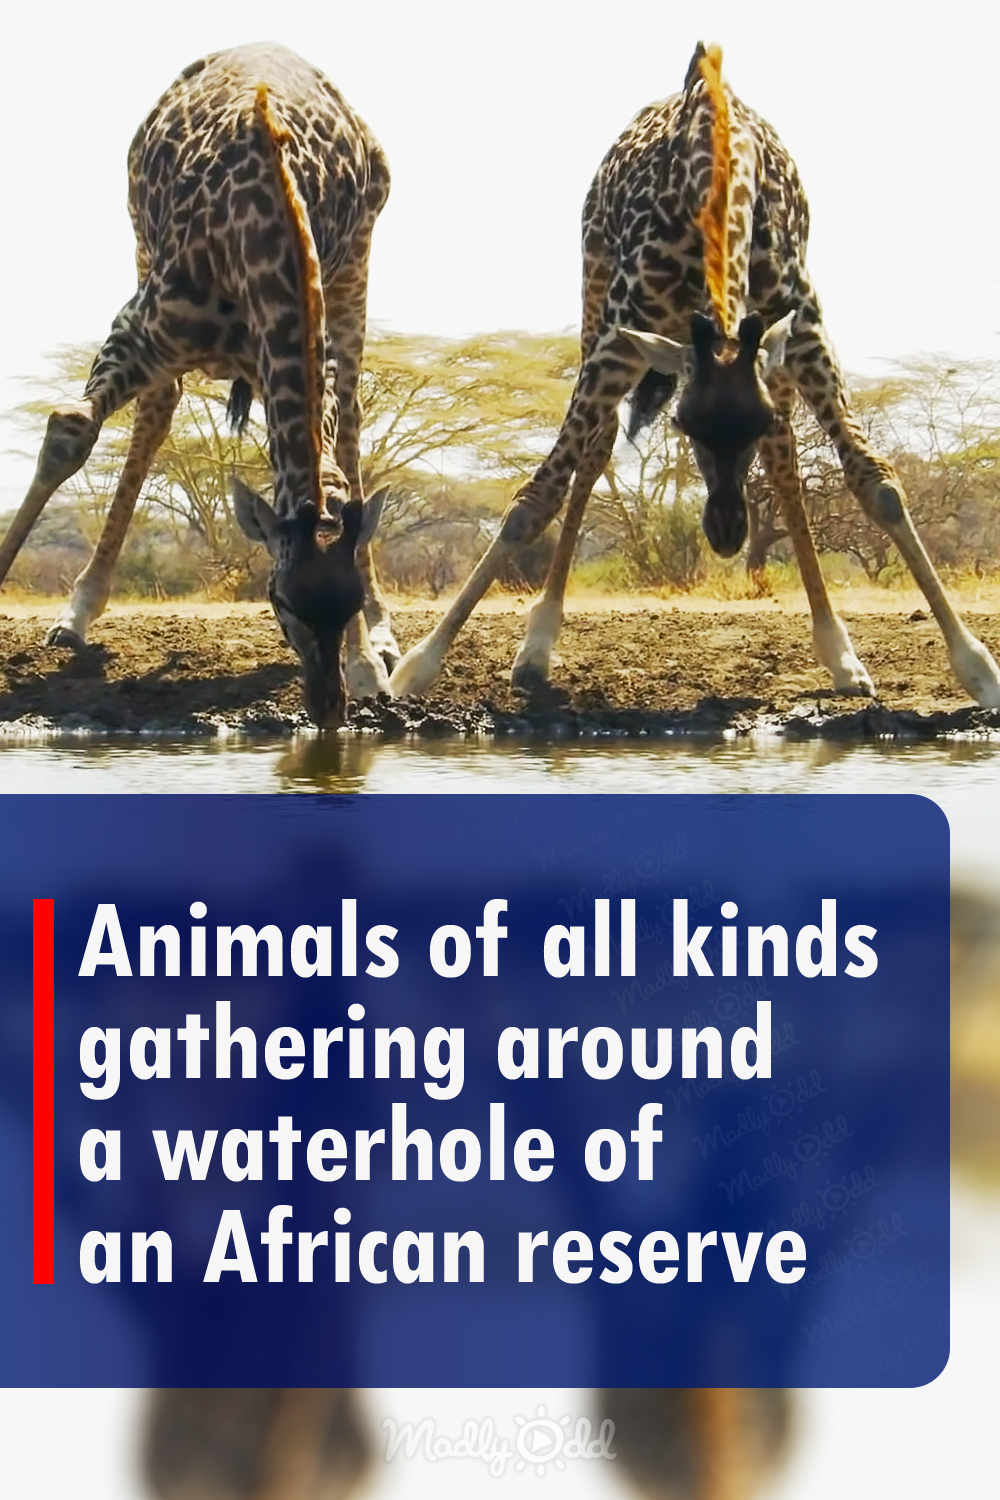 Animals of all kinds gathering around a waterhole of an African reserve